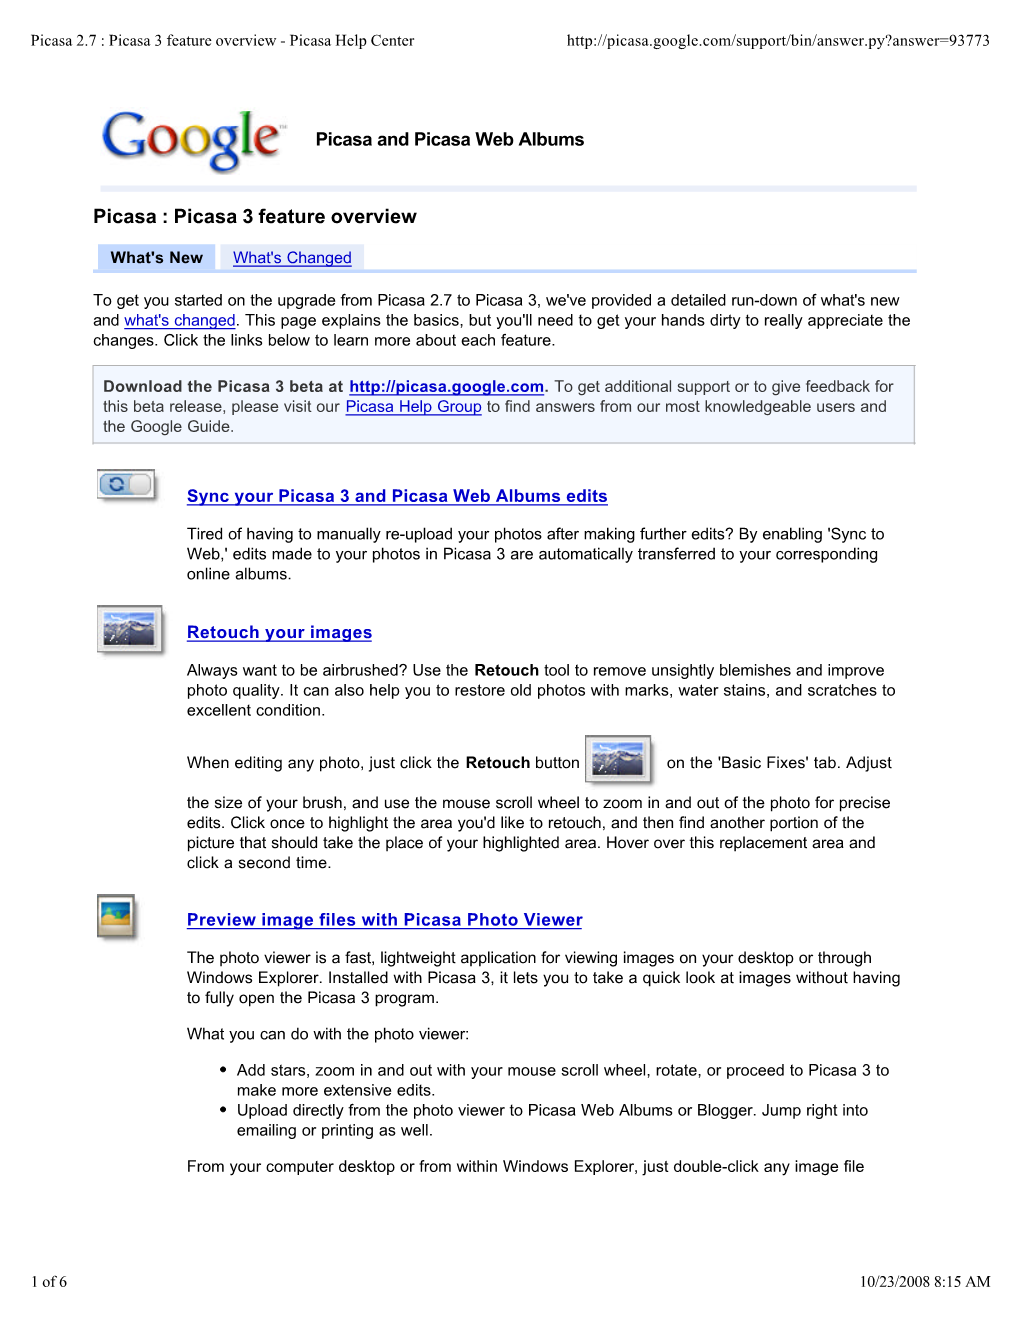 Picasa 3 Feature Overview - Picasa Help Center